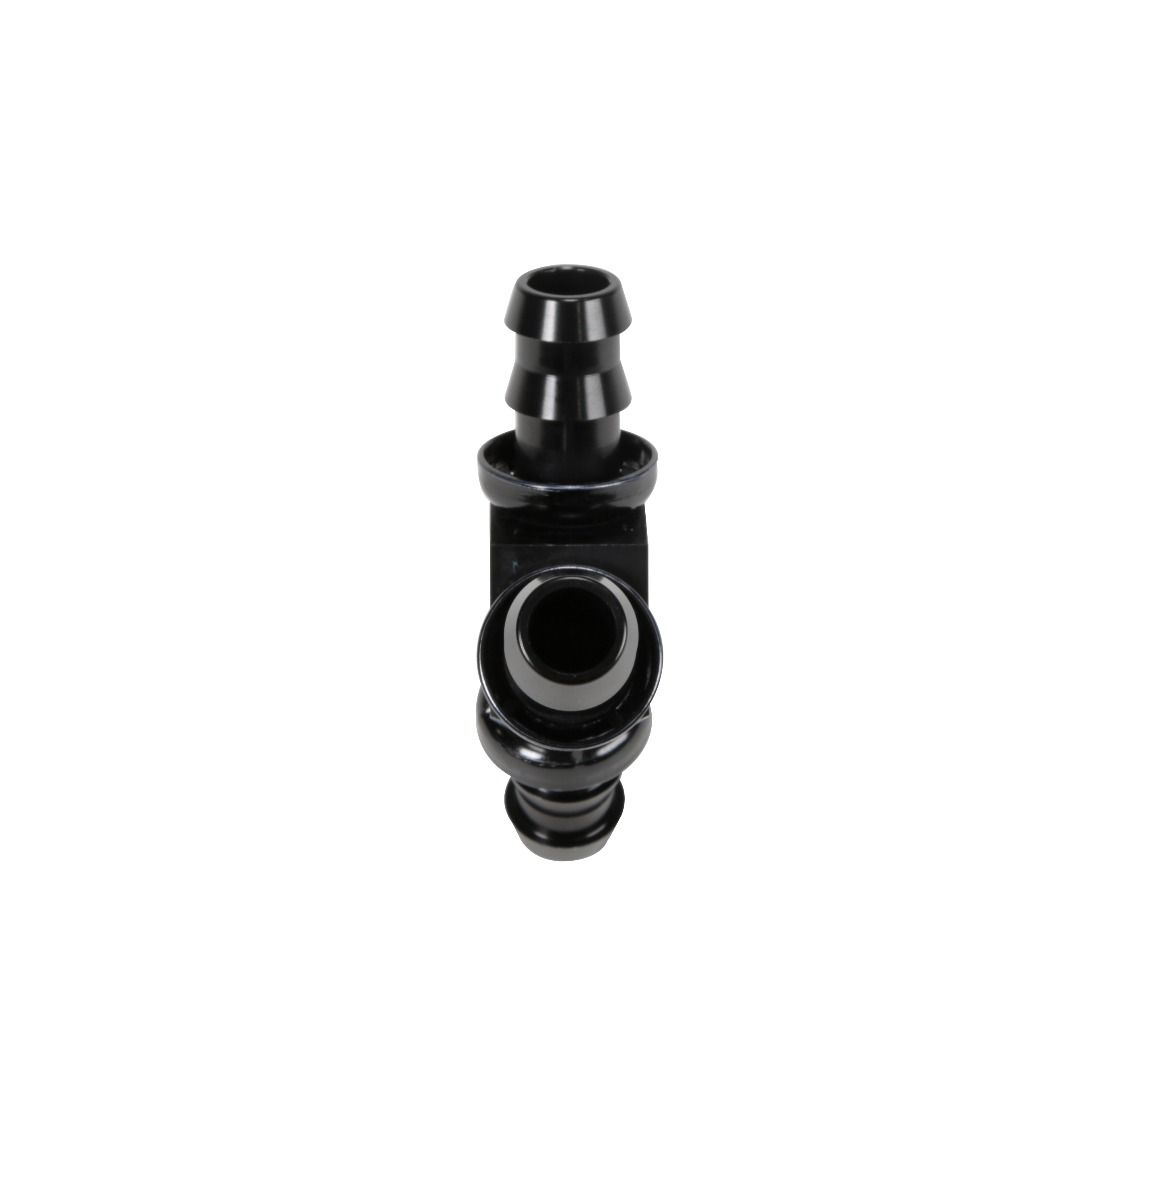 Fleece Performance 1/2 Inch Black Anodized Aluminum Y Barbed Fitting (For -8 Pushlock Hose) pn fpe-fit-y08-blk